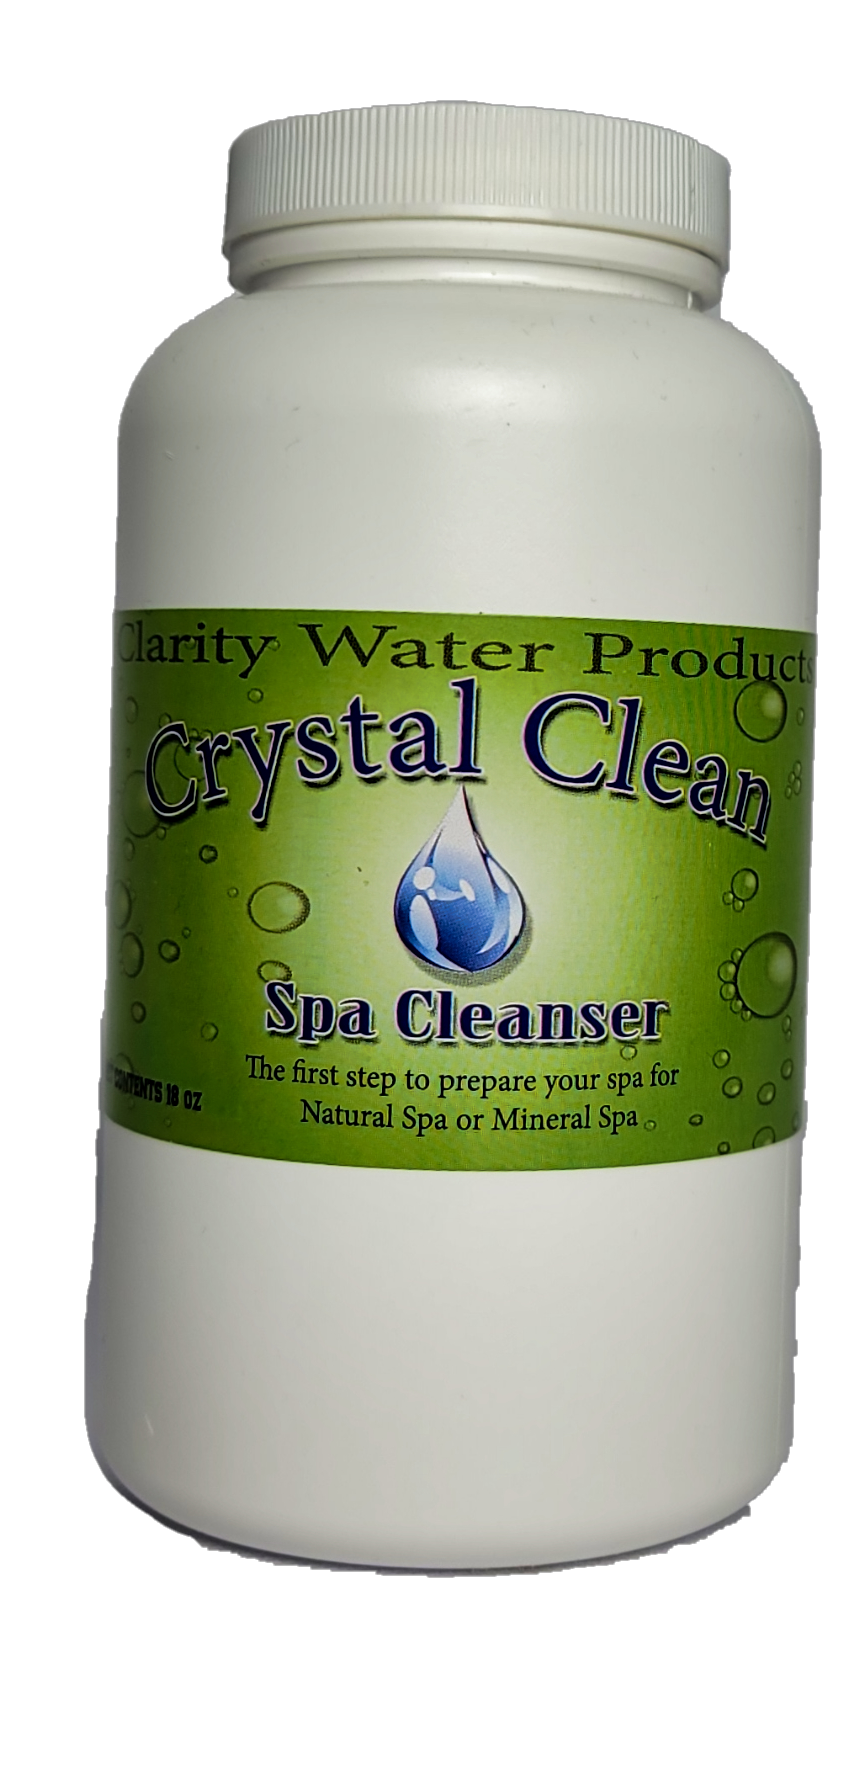 Crystal Clean - Natural Hot Tub Cleaner